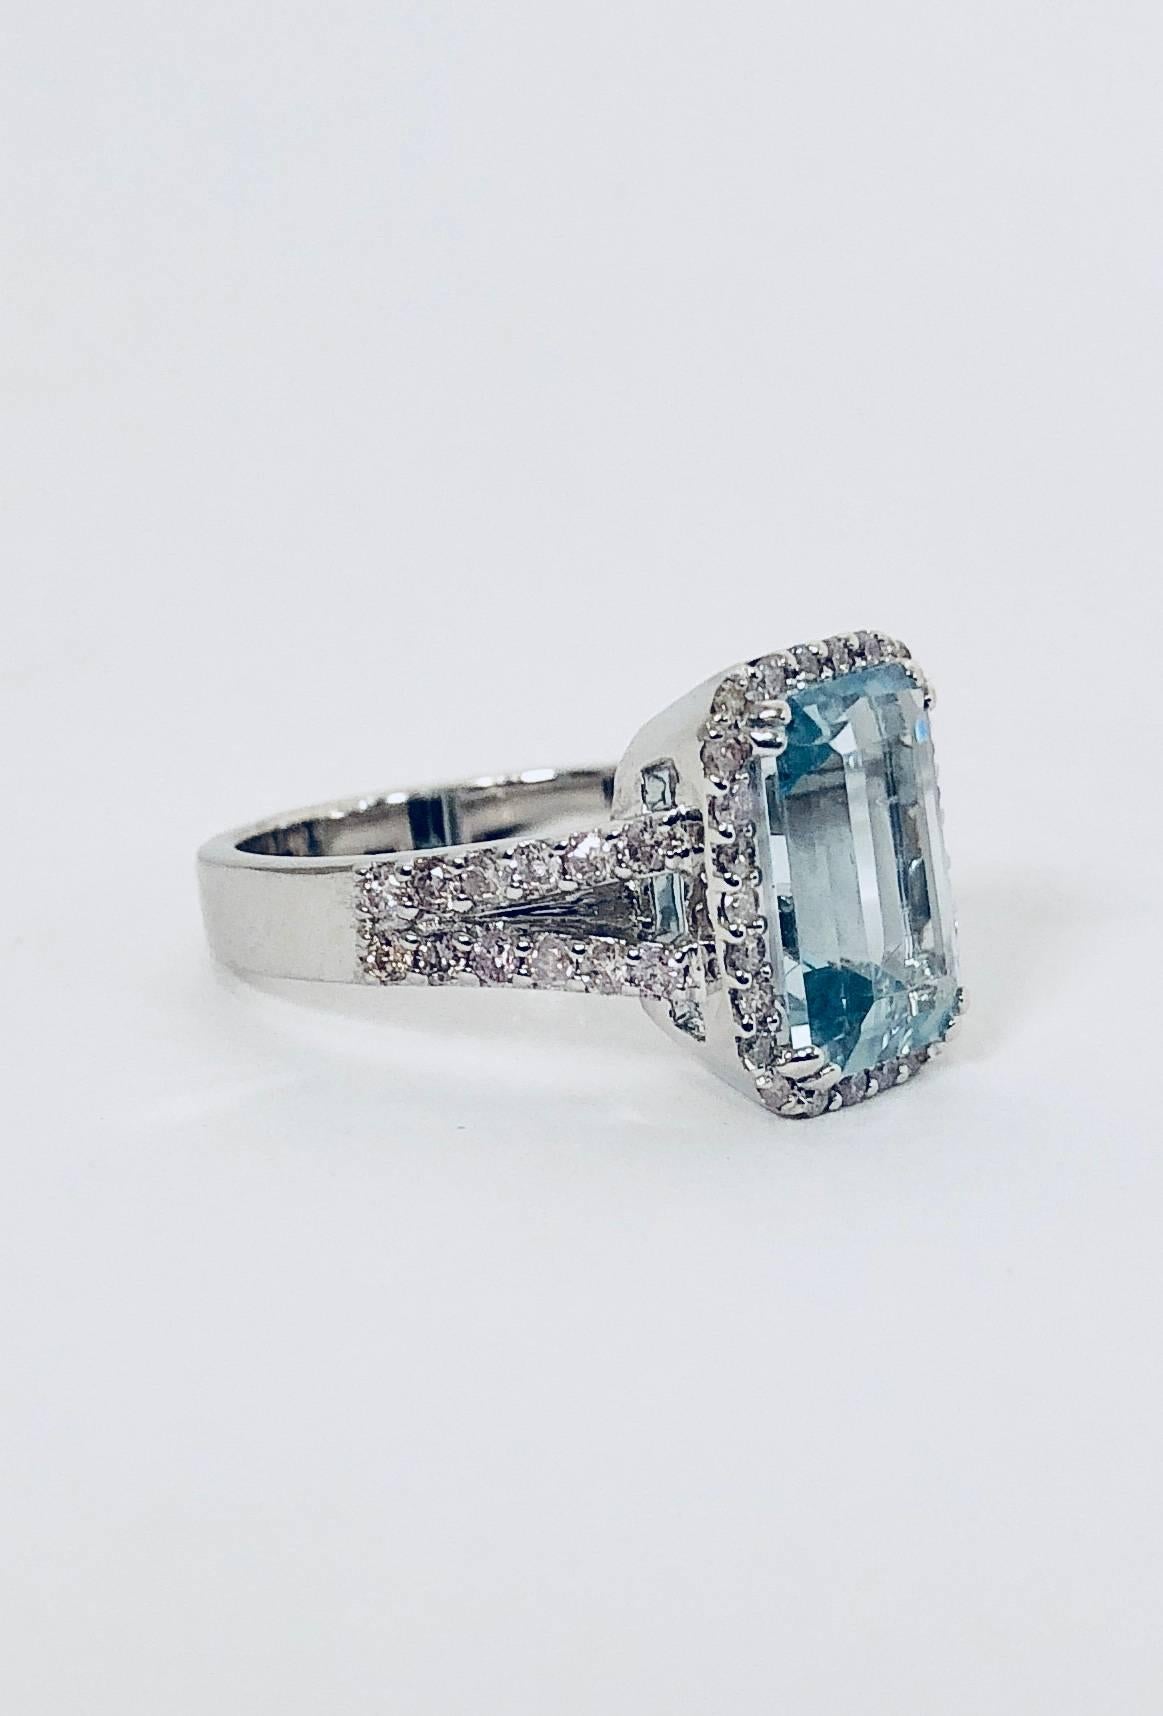 Perhaps one of the softest, most ladylike combinations in all of fine jewelry.  Beautifully crafted in 18 karat white gold this ring features  an emerald cut aquamarine weighing 2.43 carats, embraced by a white round diamond micro pave halo that